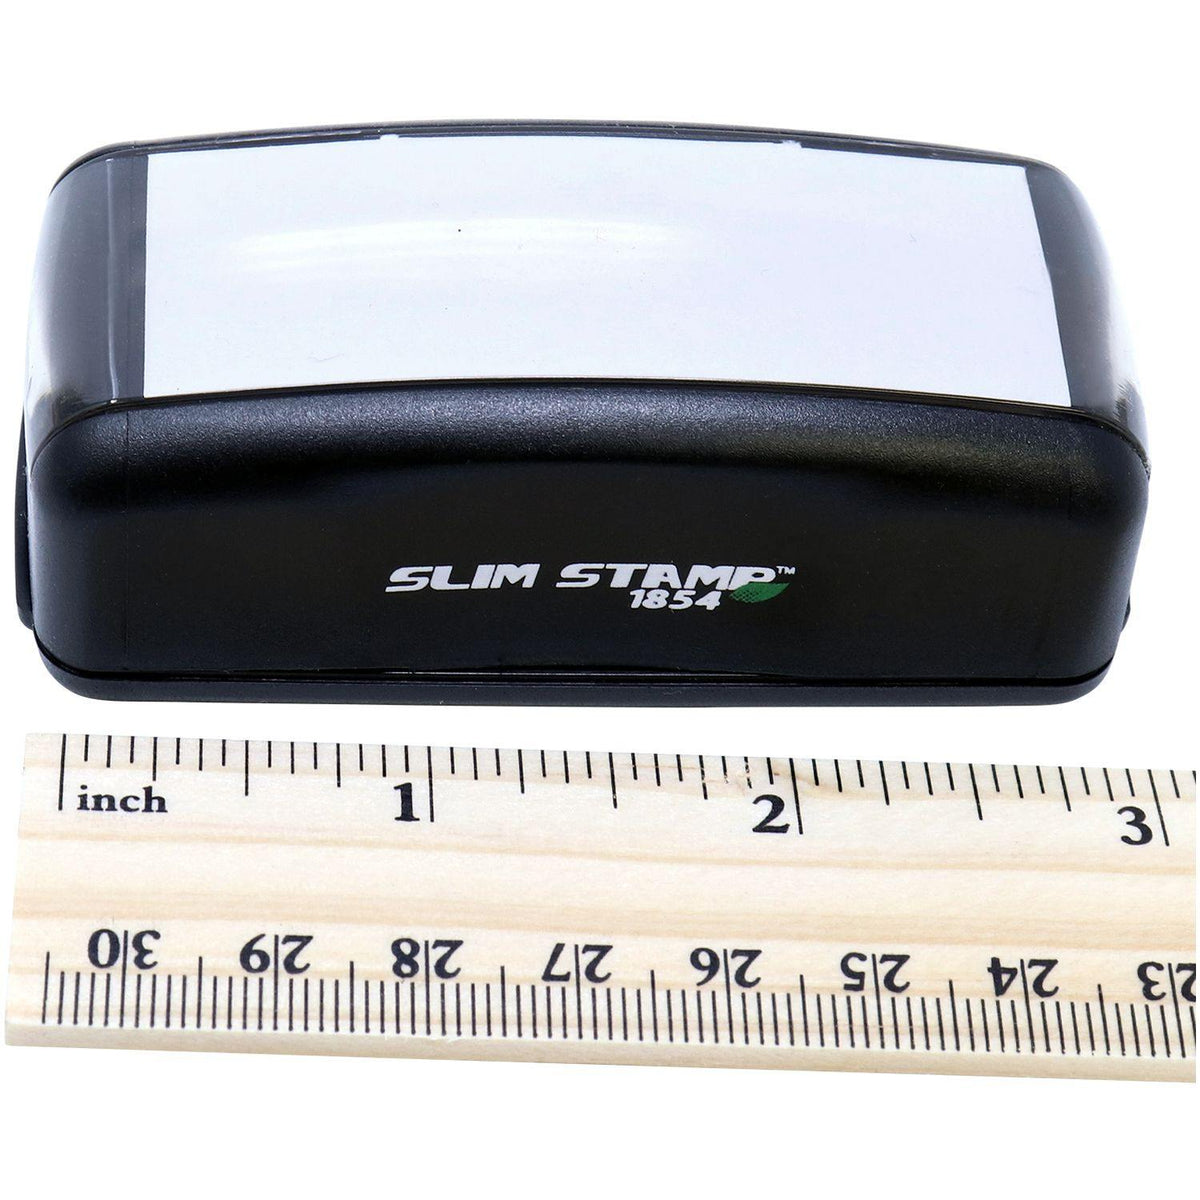 Measurement Large Pre-Inked Standard Mail A Stamp with Ruler